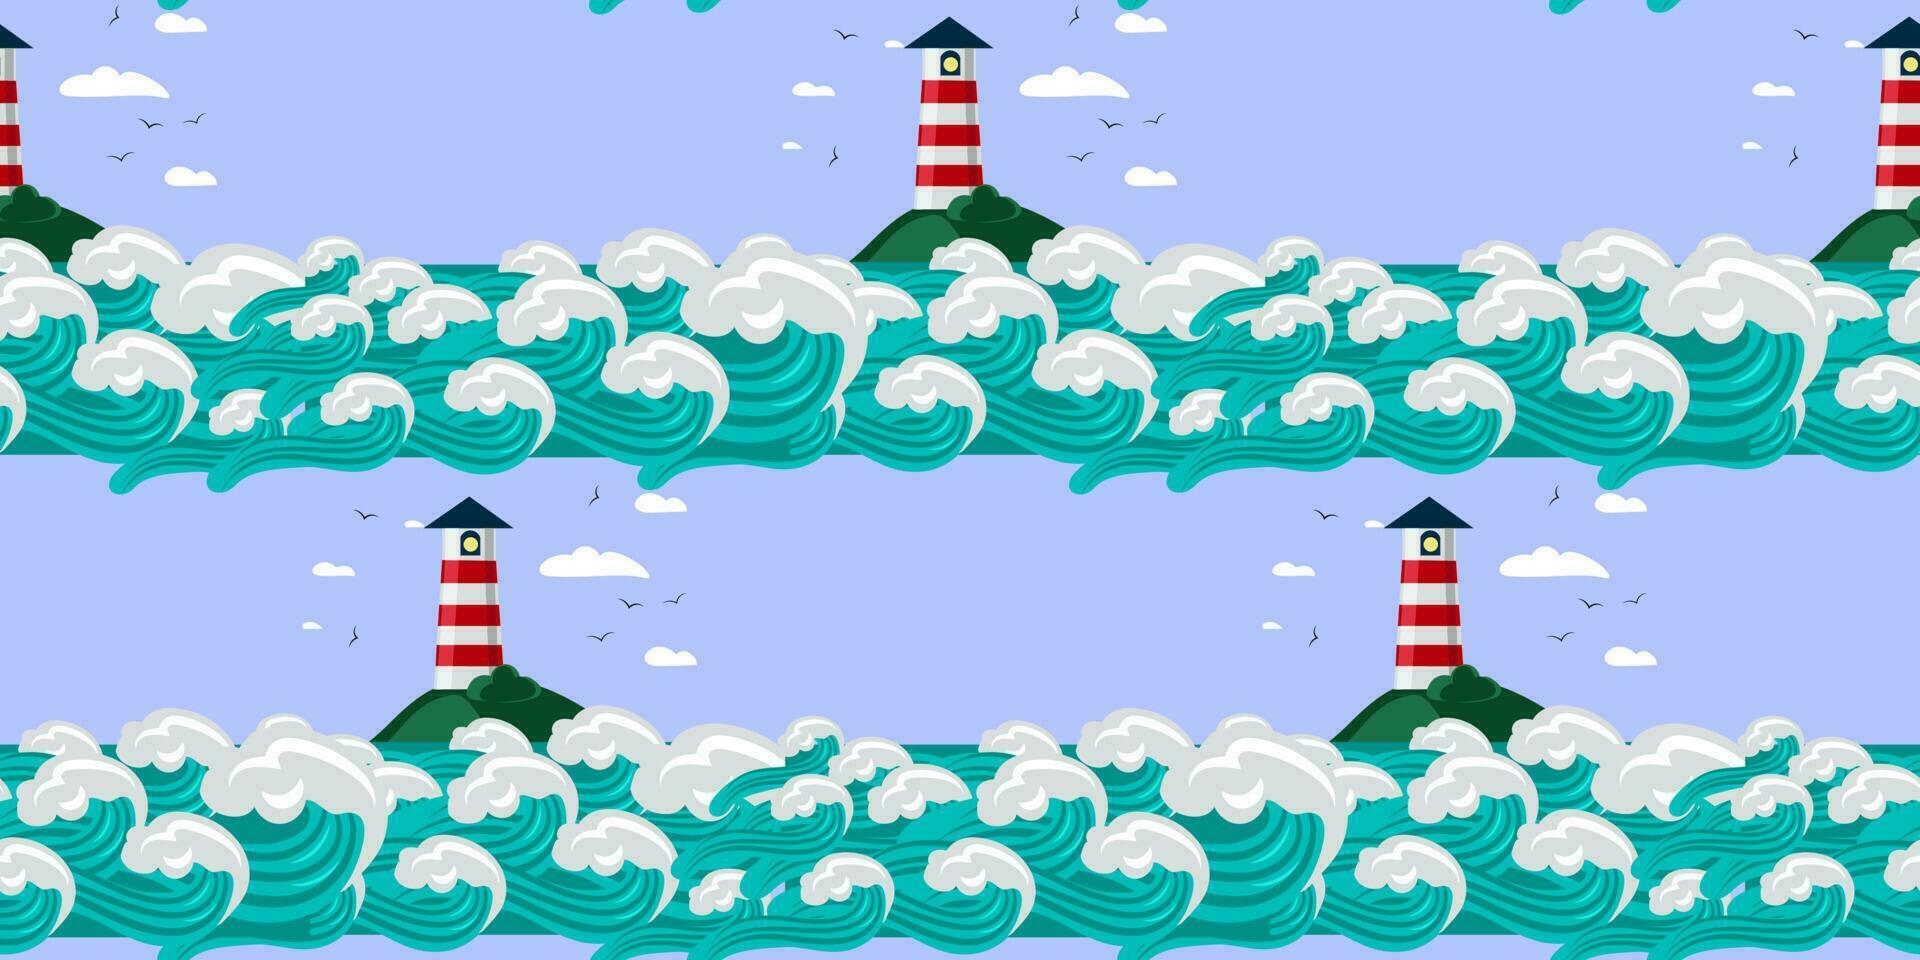 A pattern with lighthouses on an island surrounded by large waves in cartoon style. Vector graphic illustration of the ocean and coast lighthouse. Seamless pattern for printing on textiles and paper